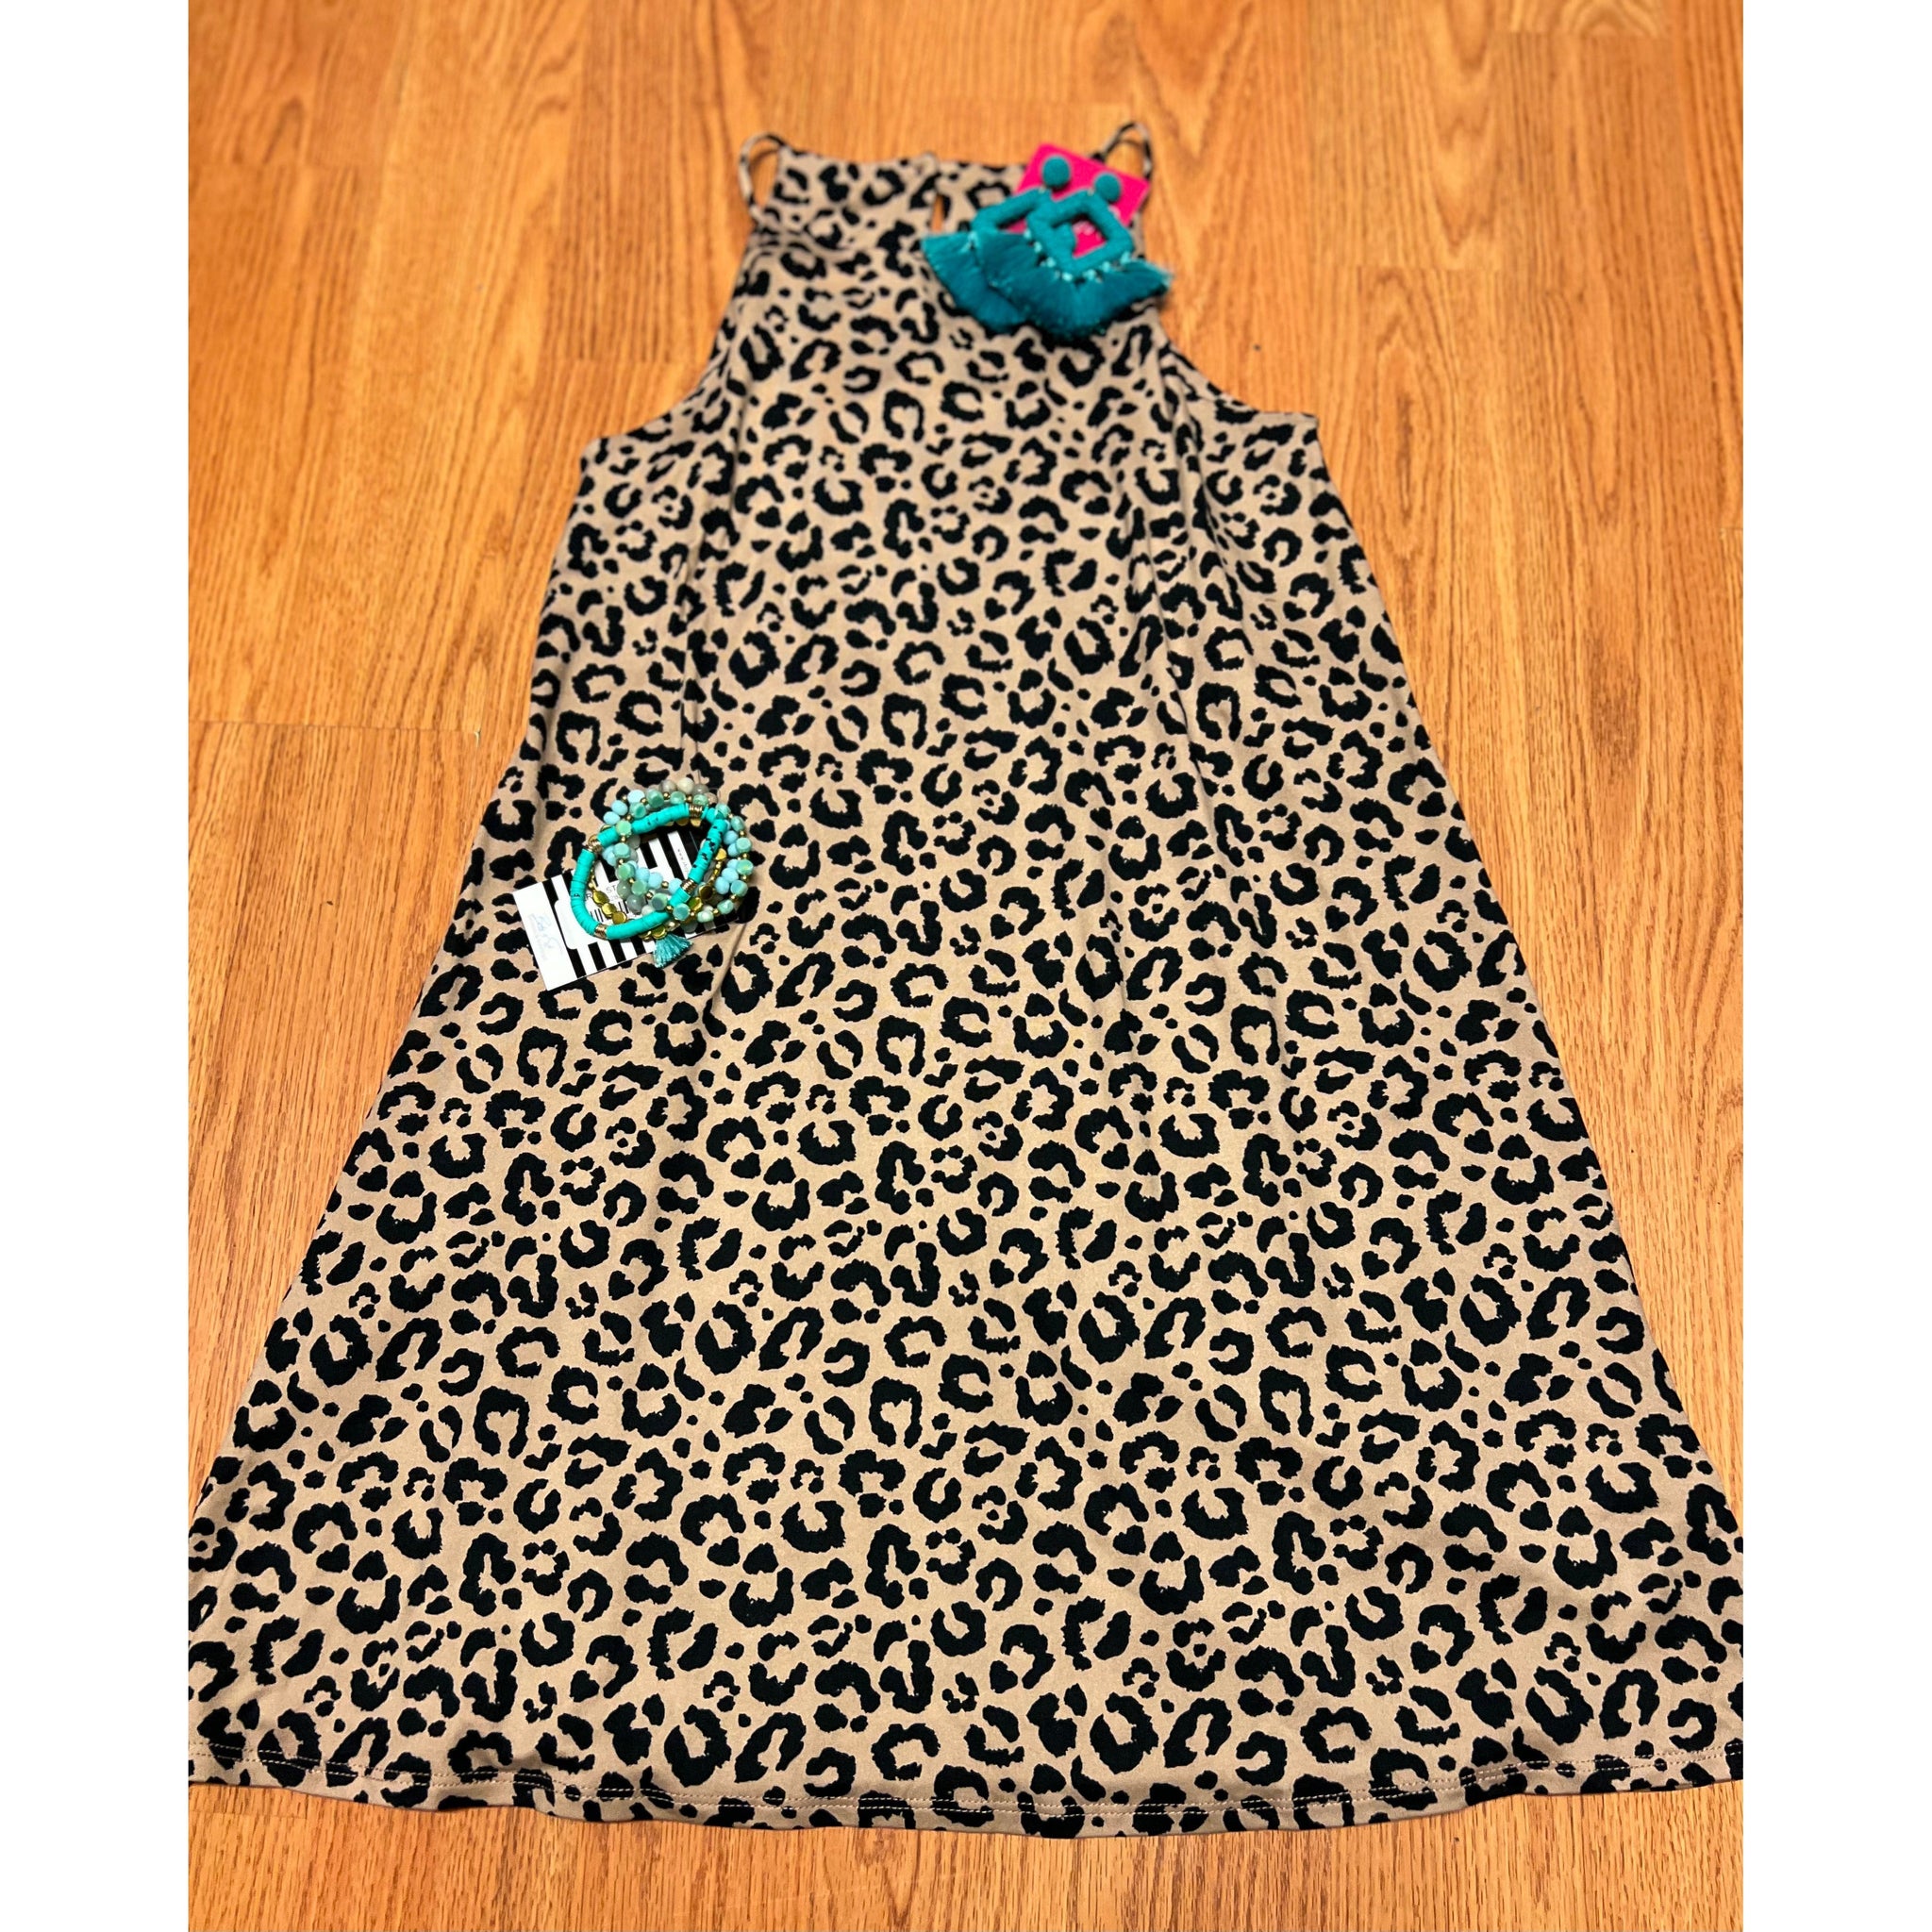 LUCKY LEOPARD DRESS-Body and Sol